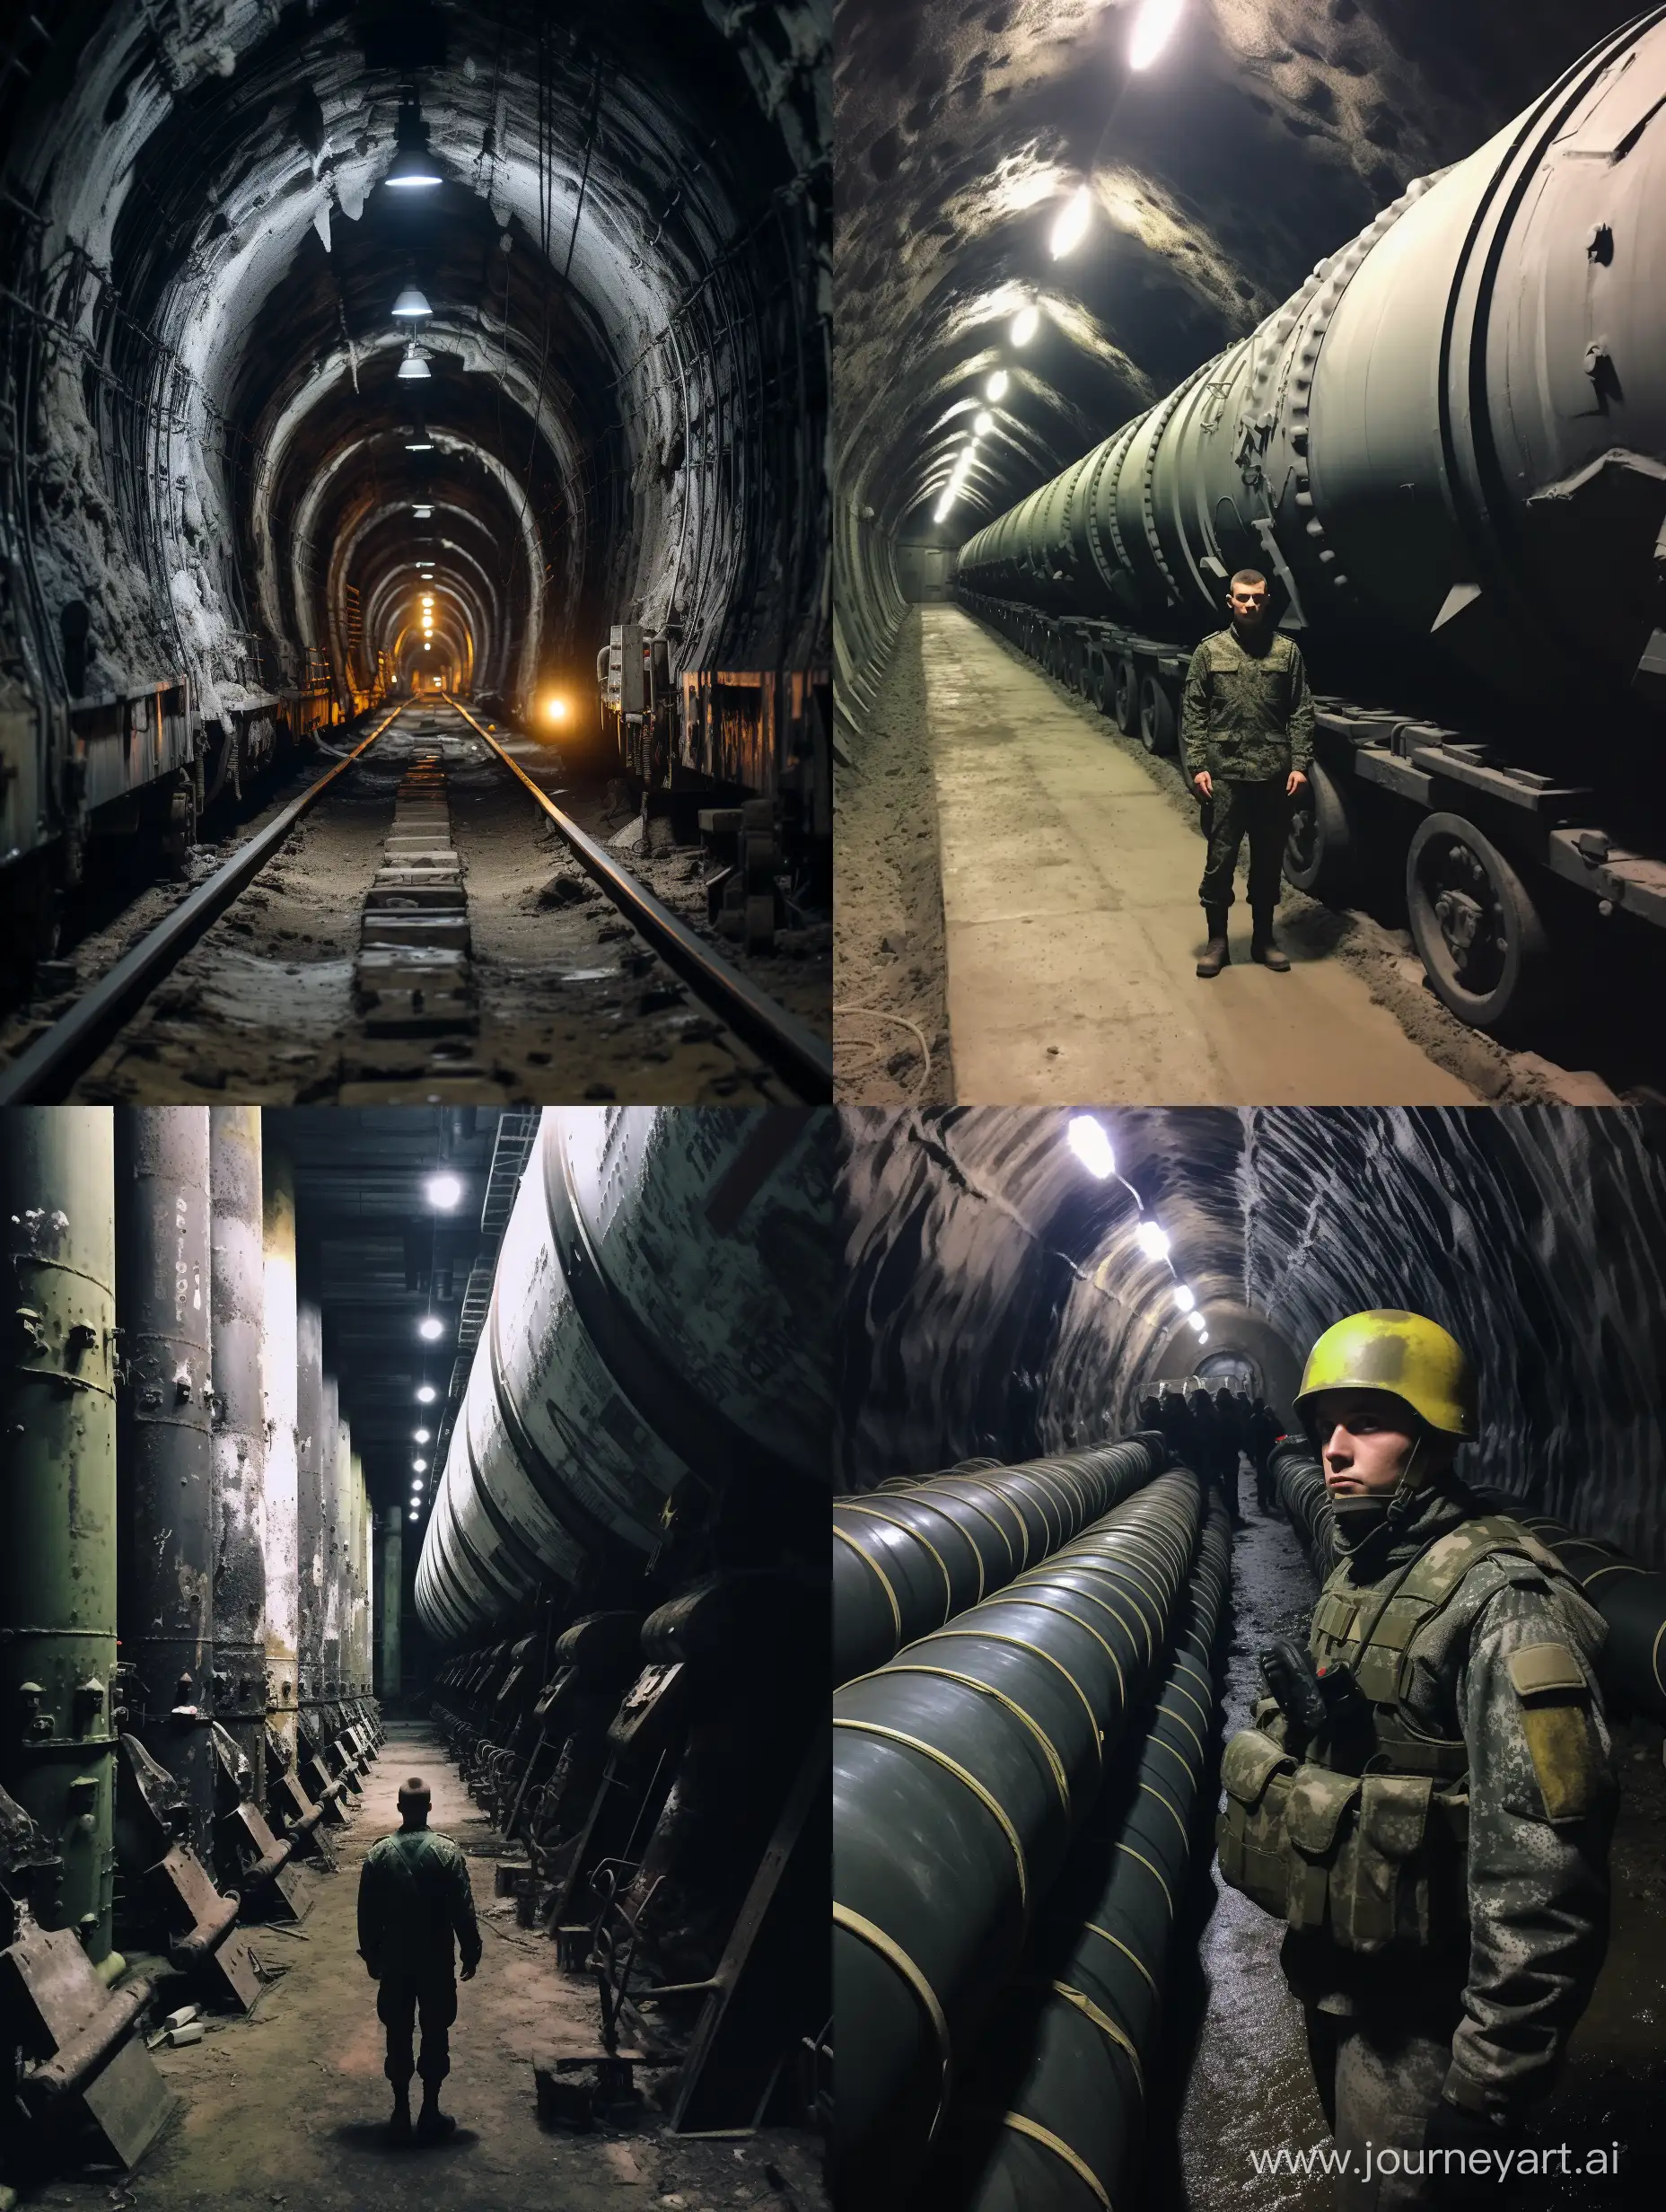 Ukraine's army with SS-18 icbm in underground missile silos and its third nuclear arsenal in the world